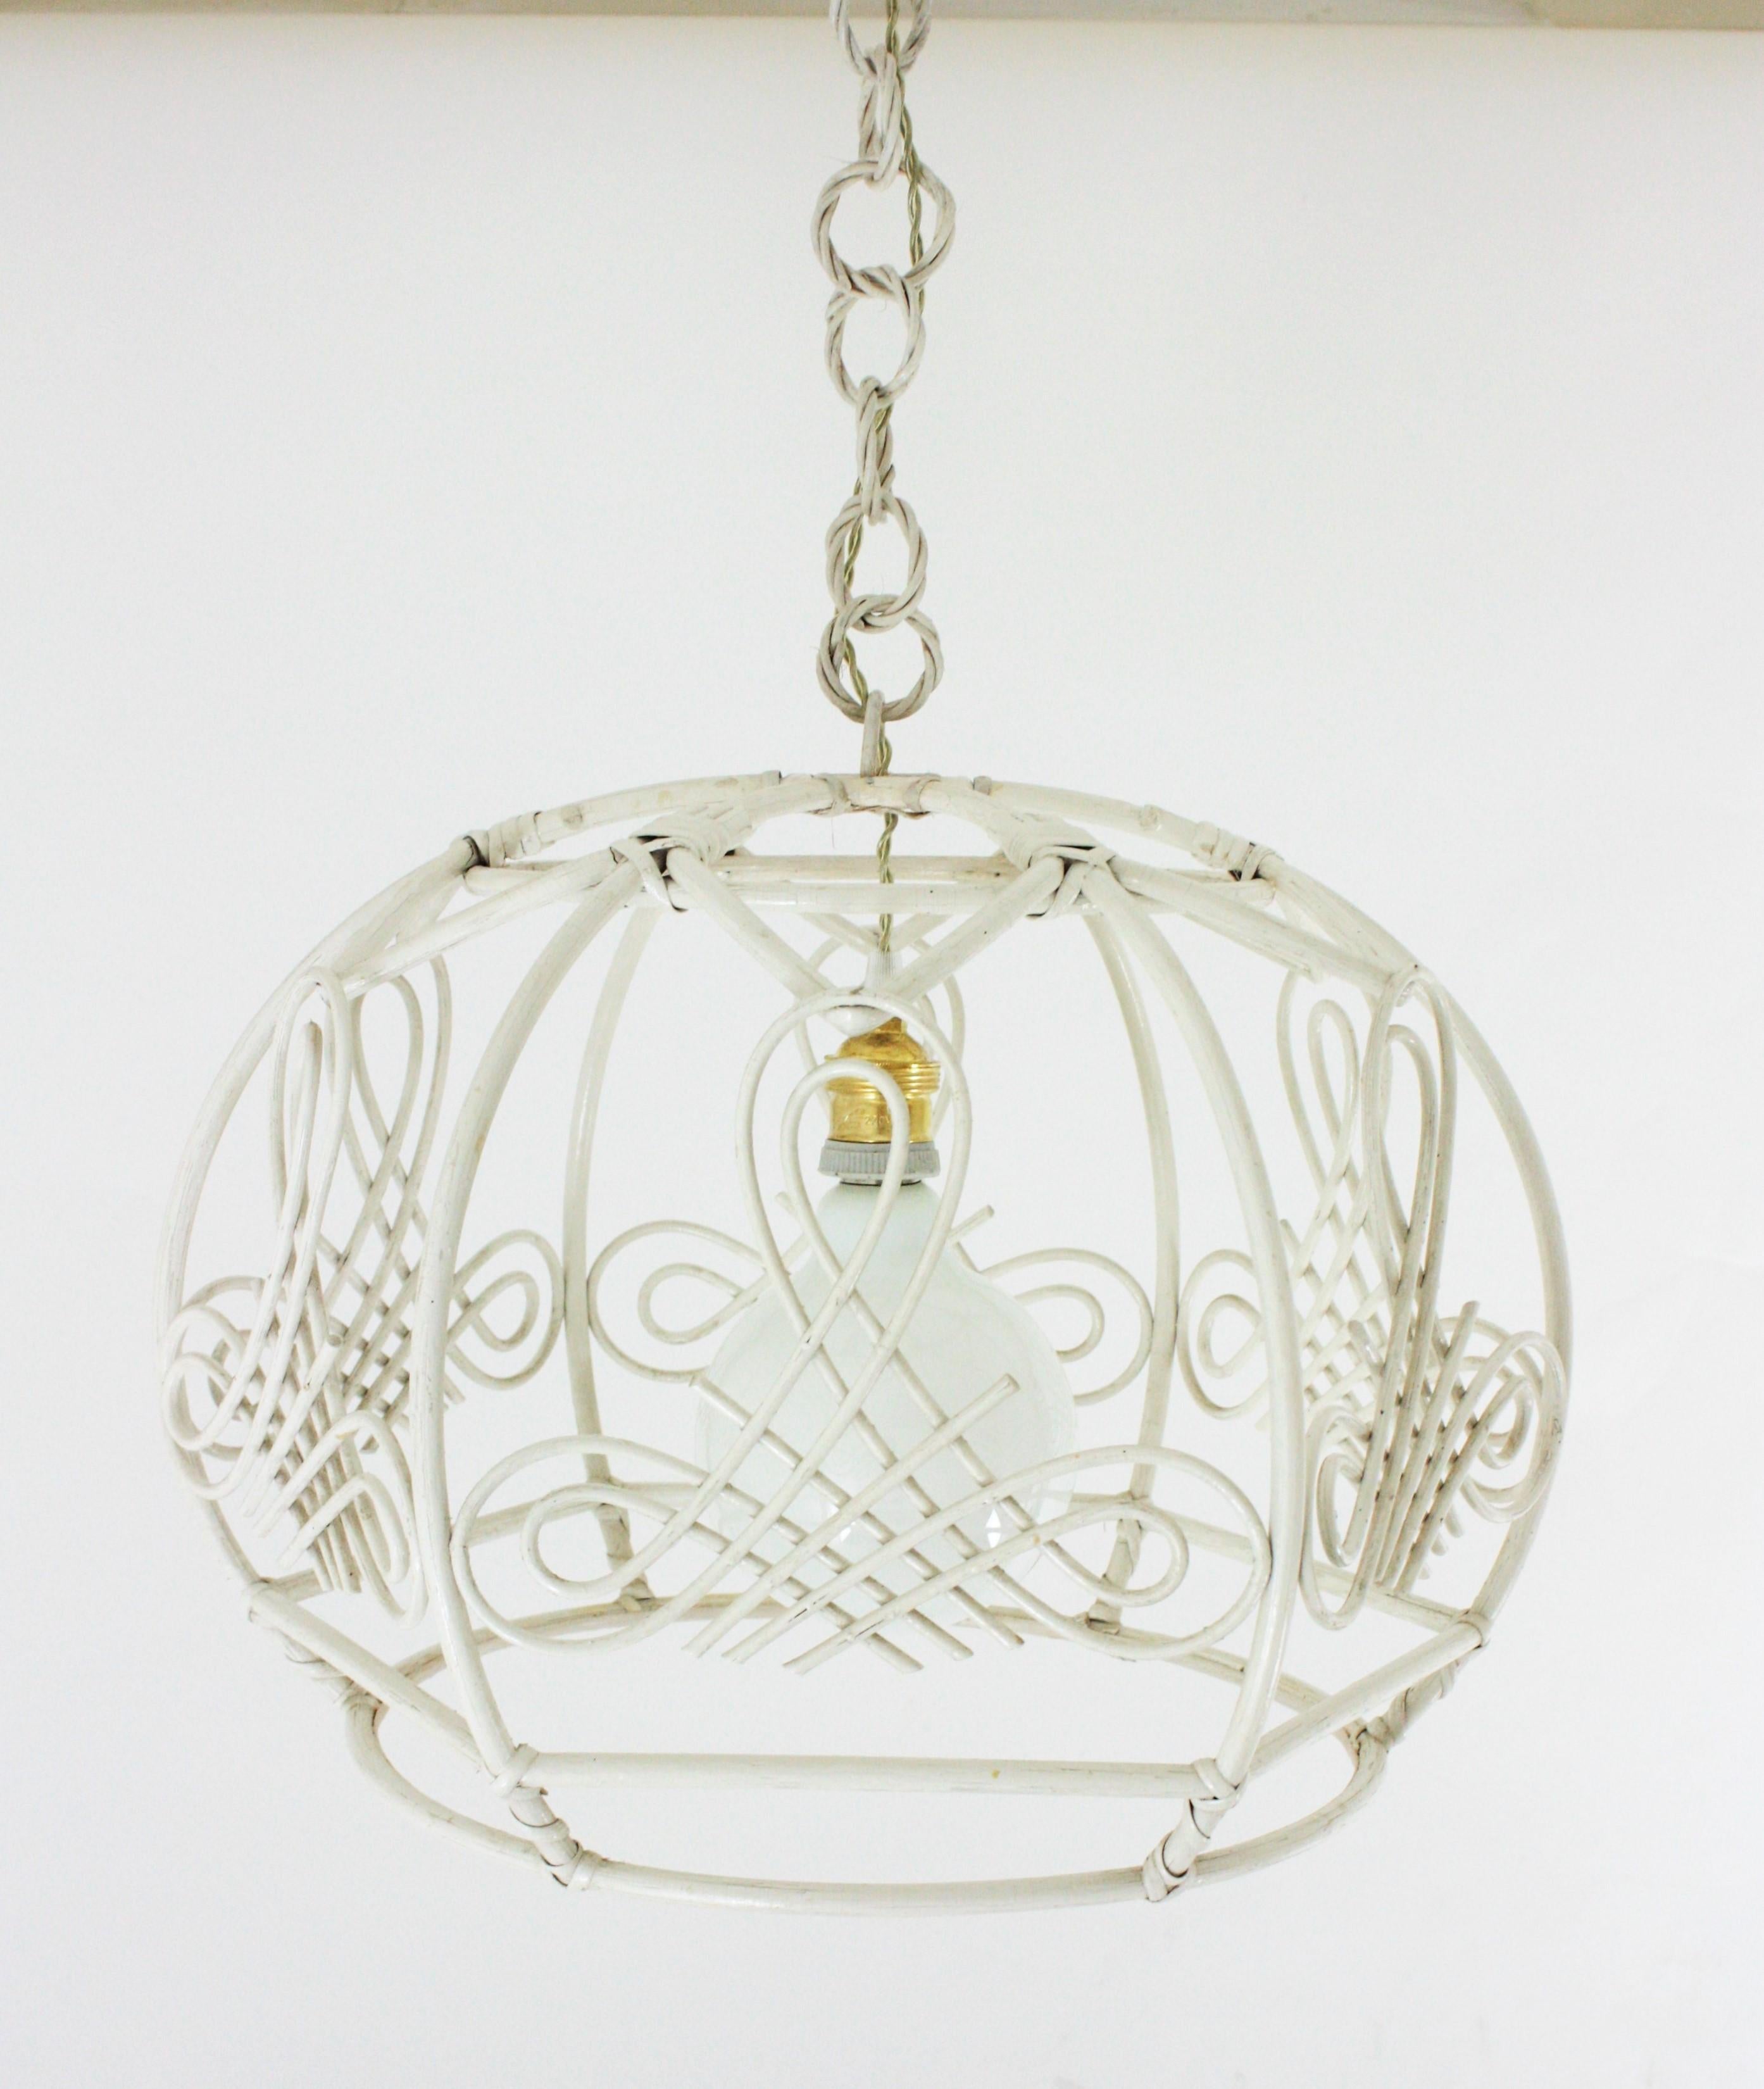 Hand-Crafted French Rattan Bell Pendant Lamp / Lantern in White Patina, 1960s For Sale